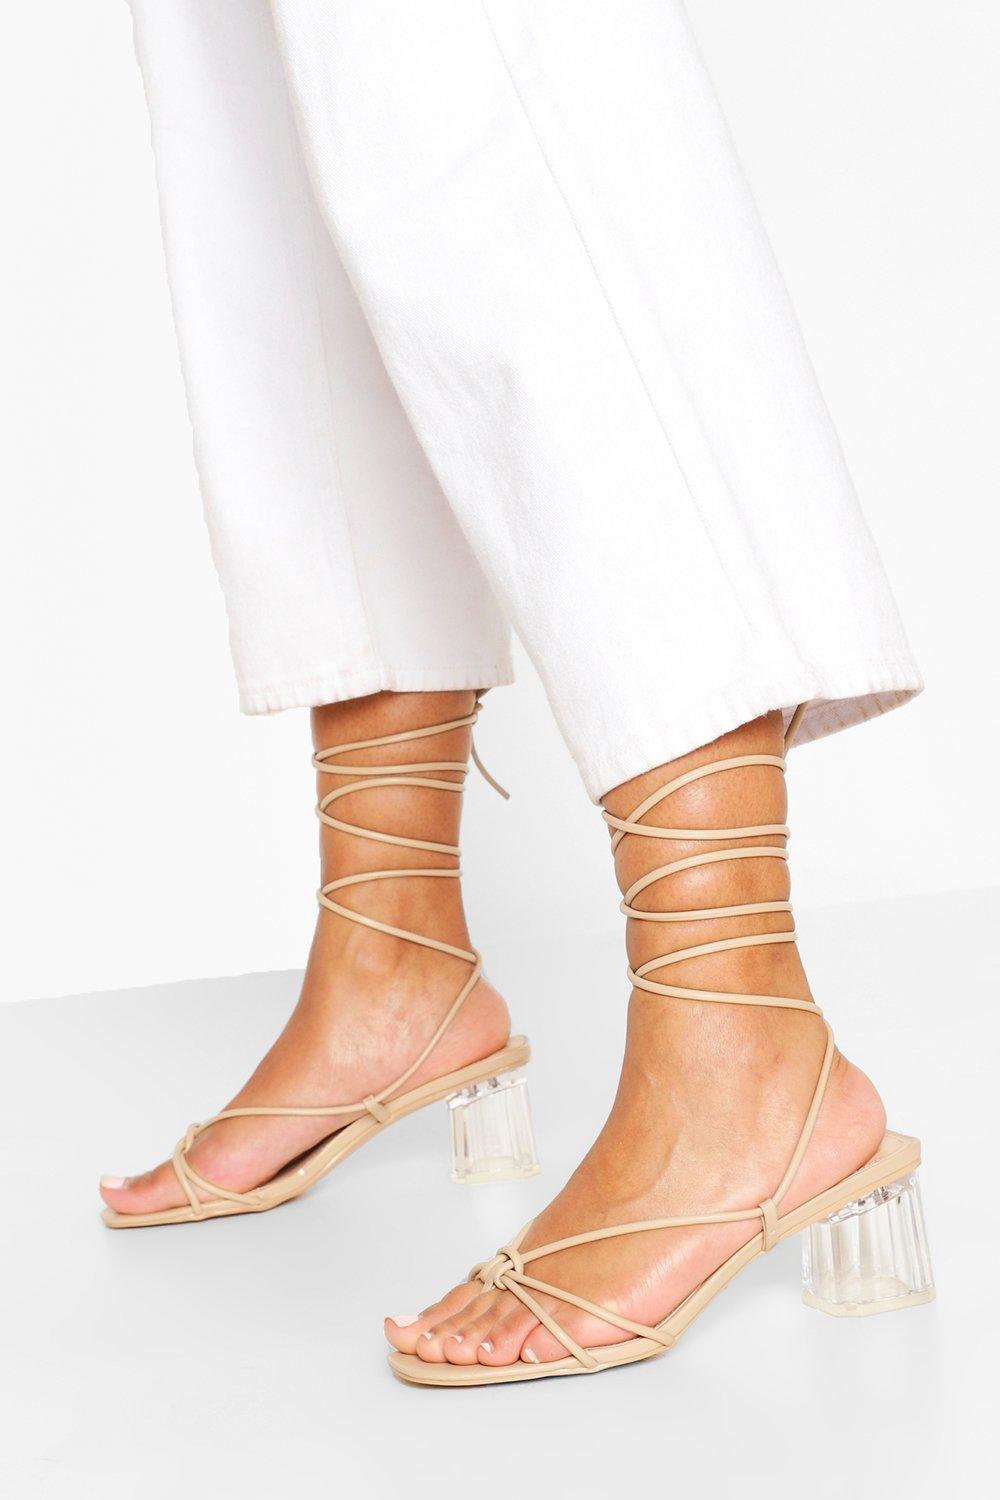 strappy clear sandals